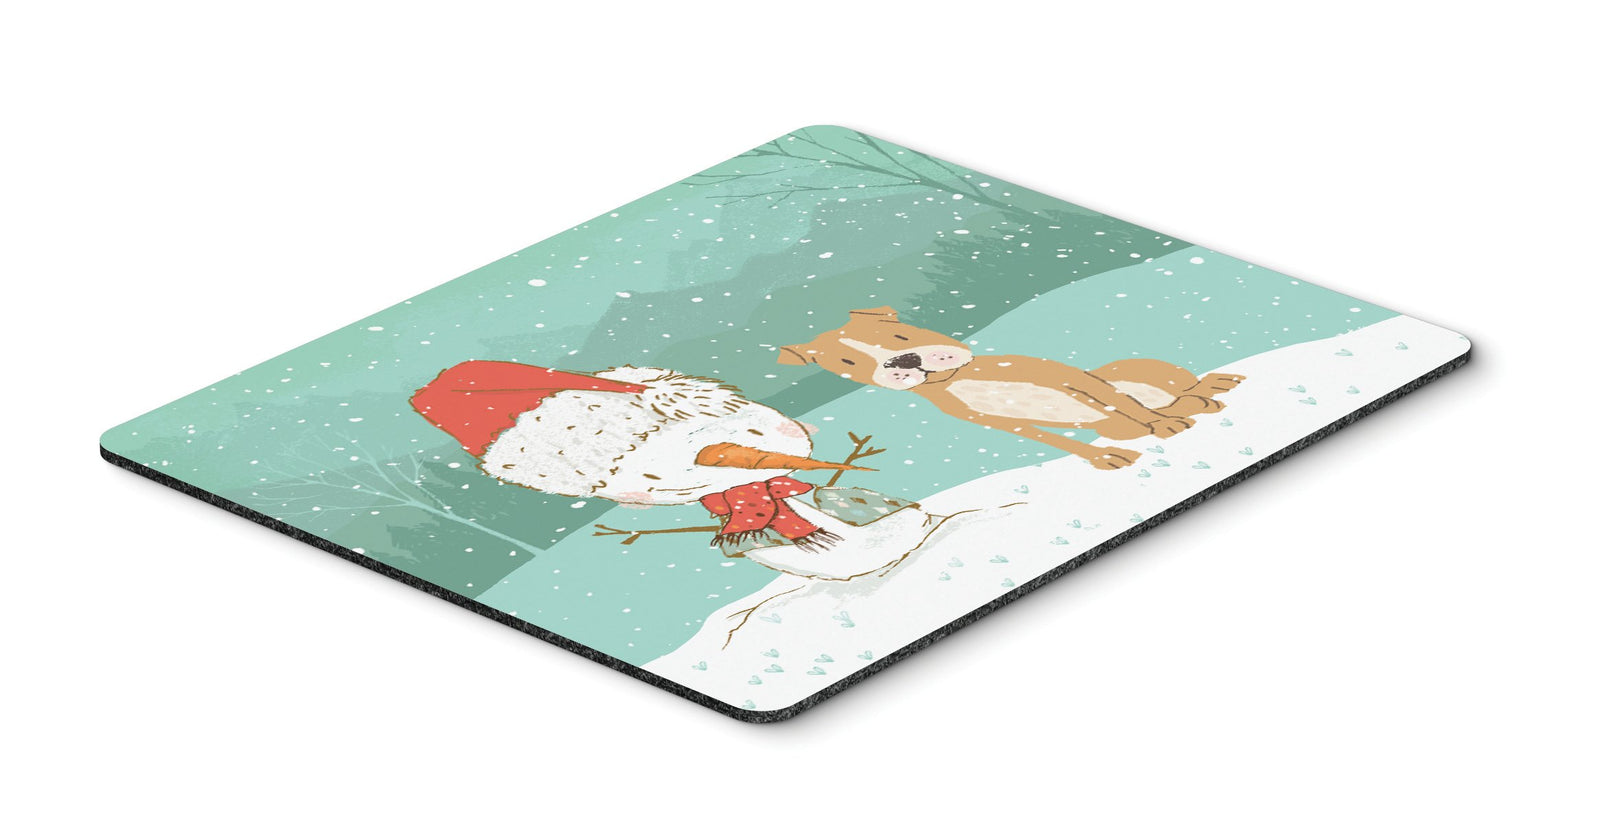 Brown Staffie Snowman Christmas Mouse Pad, Hot Pad or Trivet CK2076MP by Caroline's Treasures